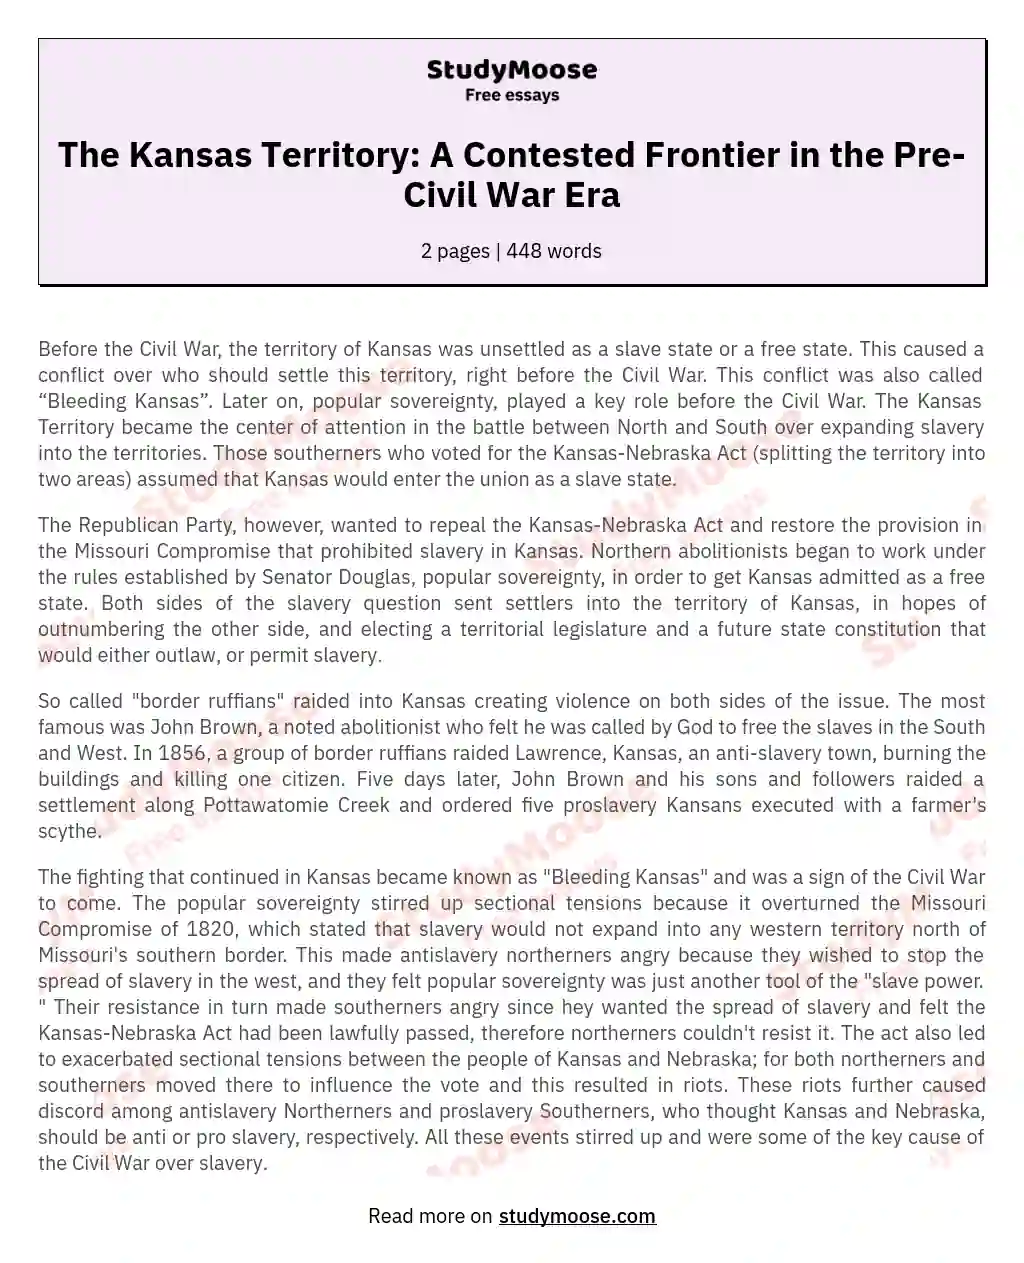 The Kansas Territory: A Contested Frontier in the Pre-Civil War Era